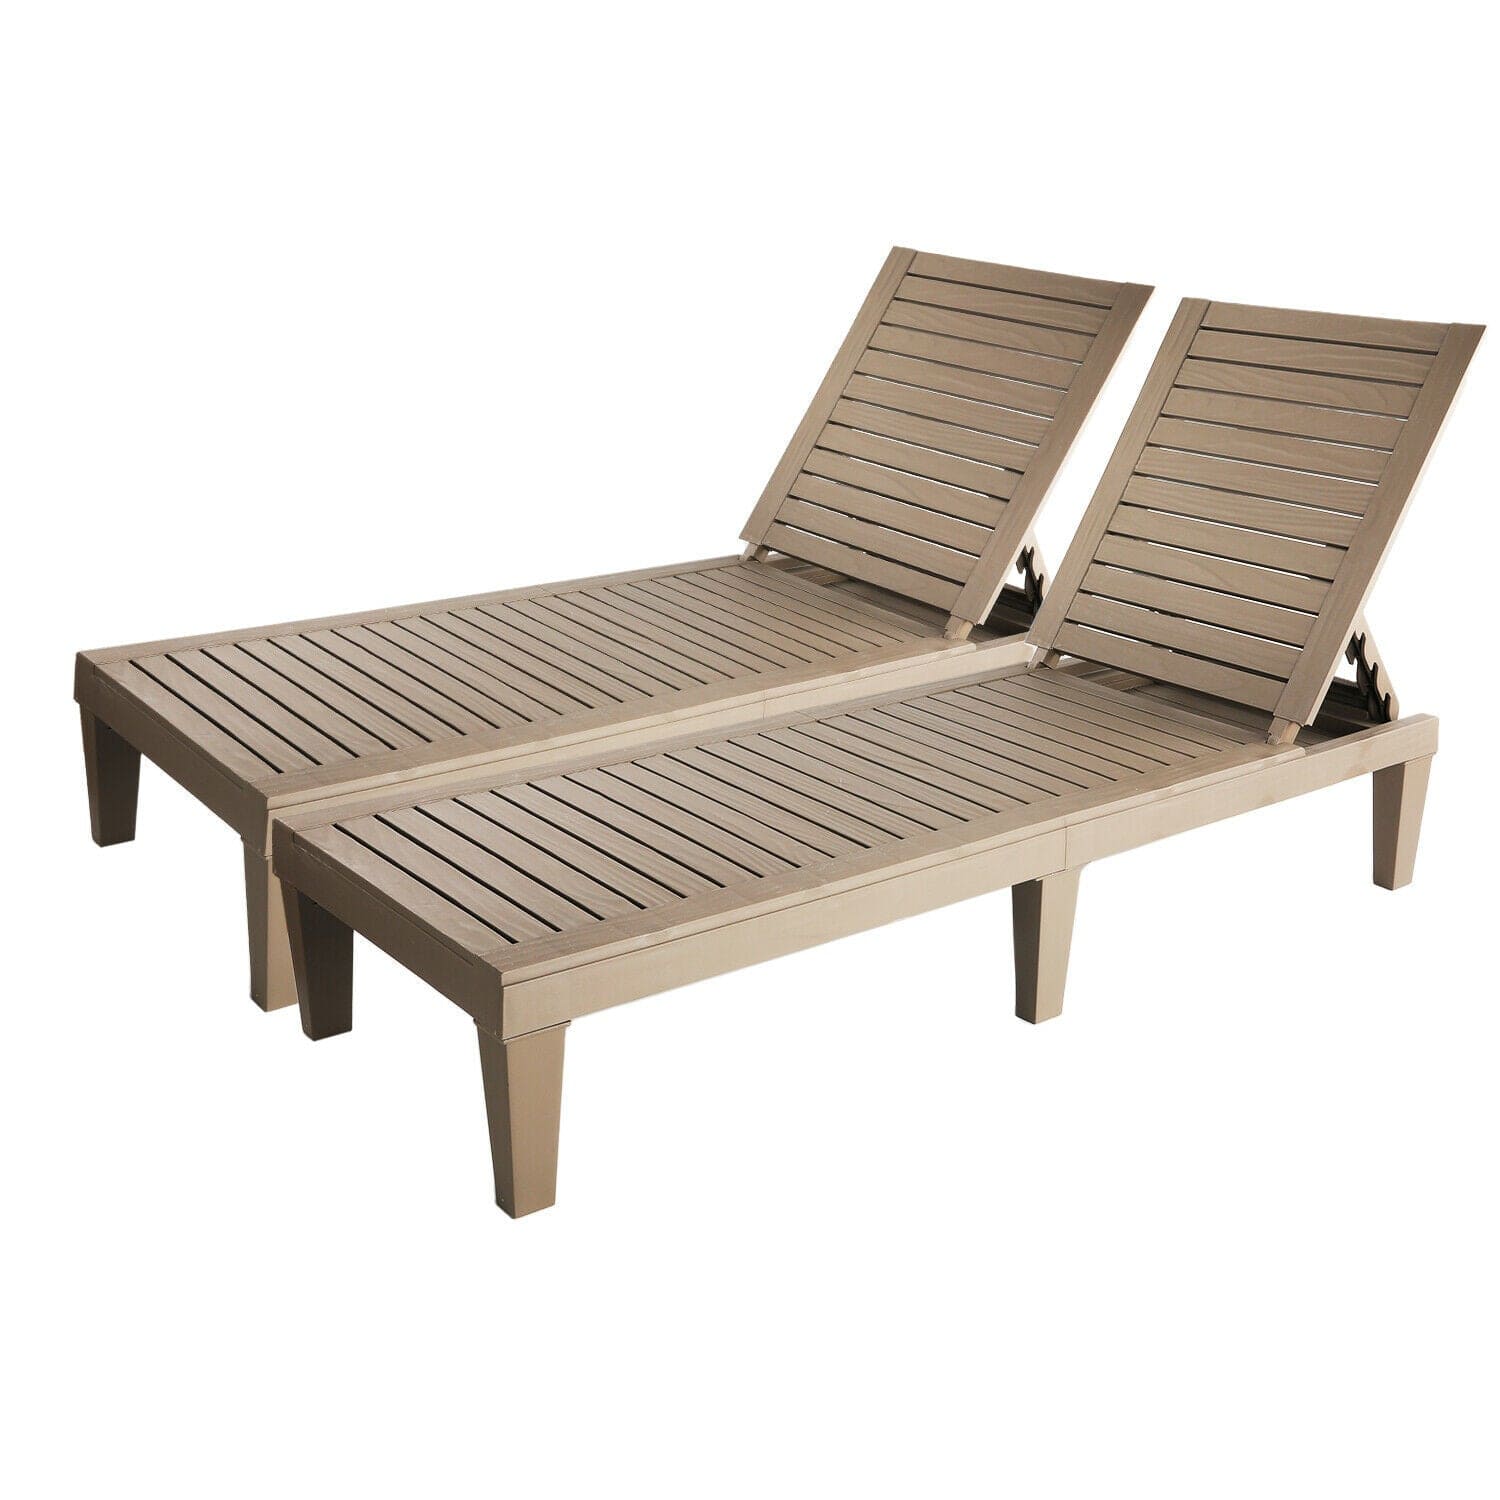 Luxury Folding Outdoor Chaise Lounge Chair 2 Pcs